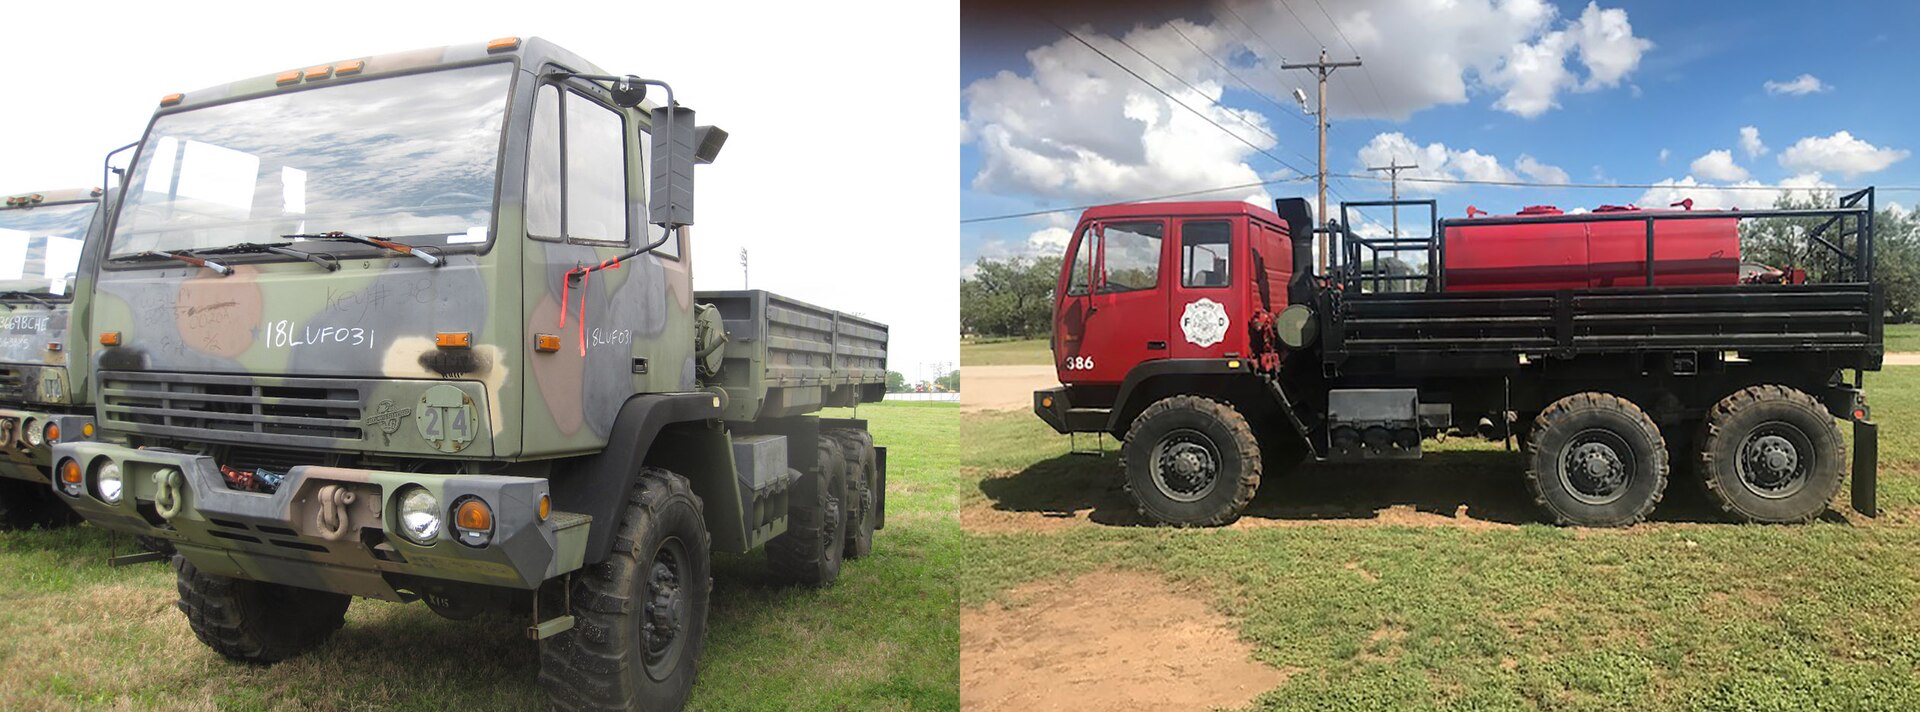 Before and after views of the Anson Volunteer Fire Department's former military truck.